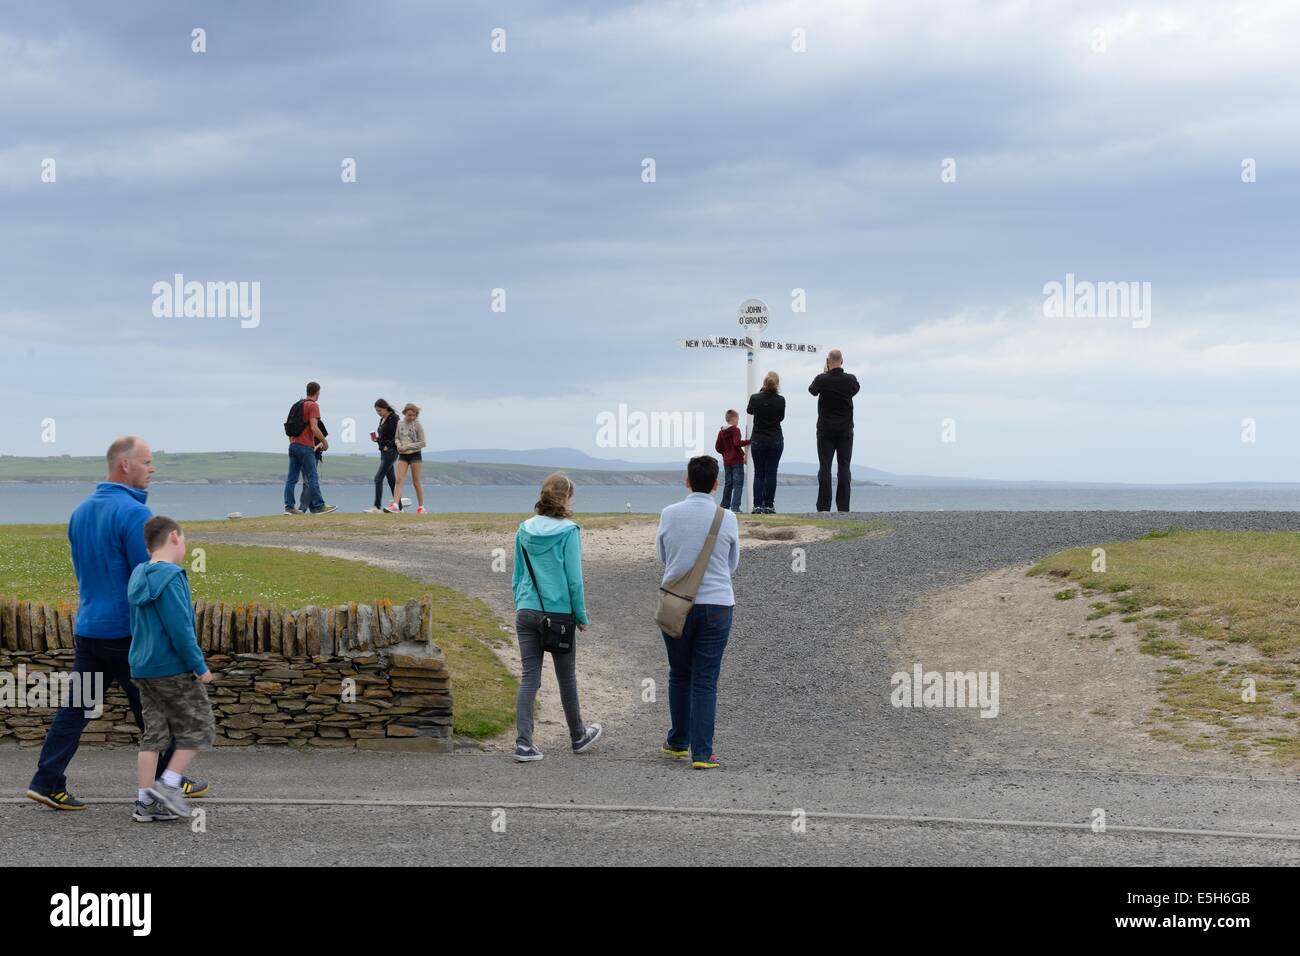 People gathering at John O' Groats signpost which is 876 miles from Lands End in the southernmost point in England Stock Photo